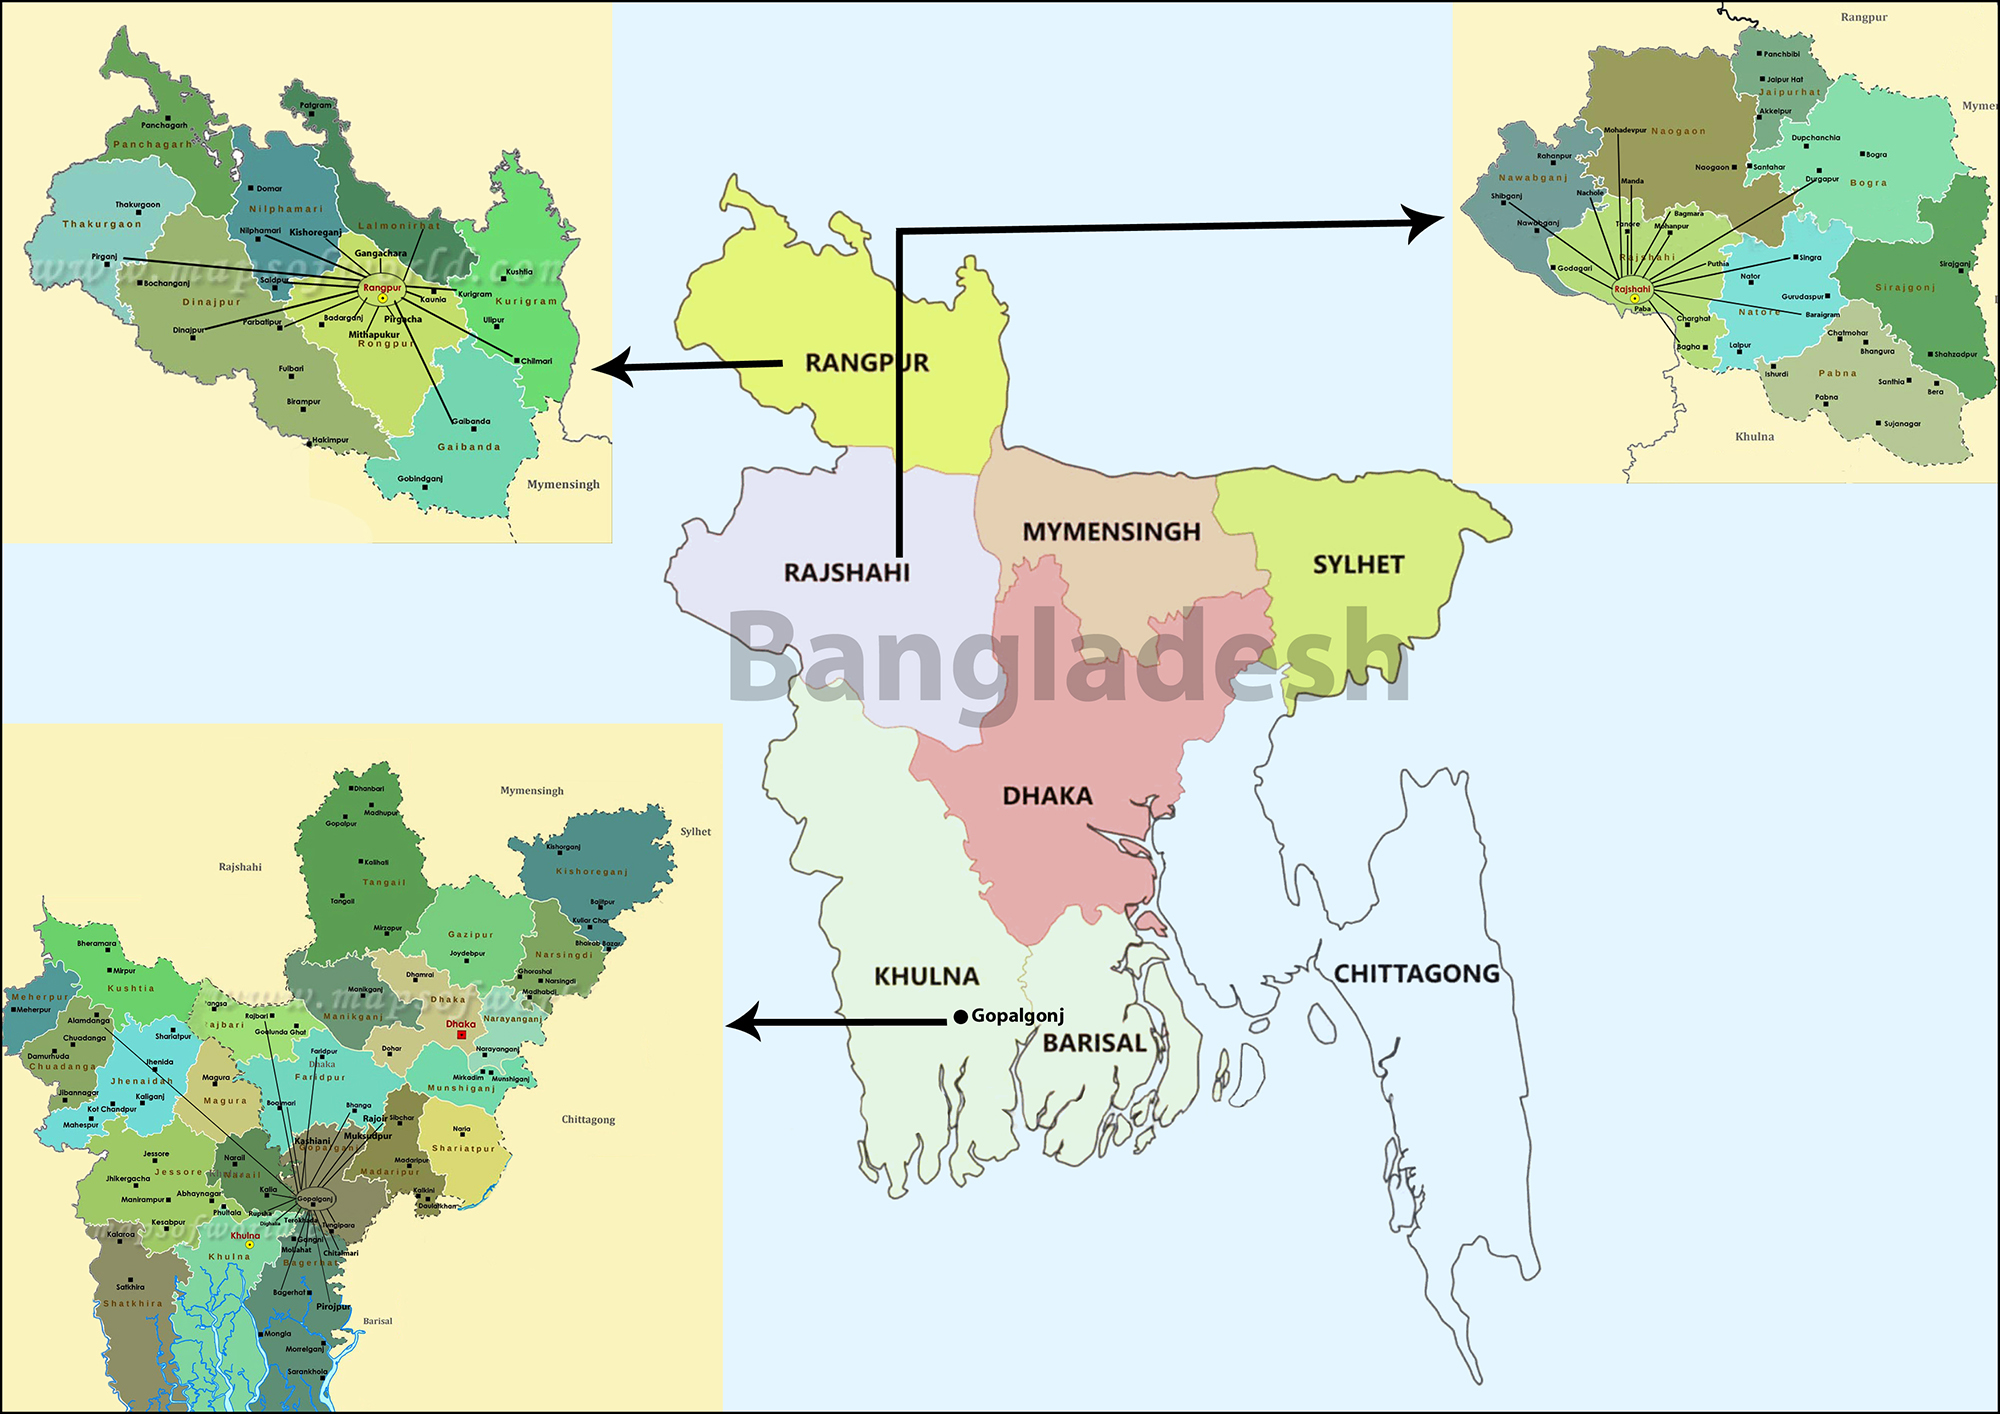 Map of Bangladesh showing the locations of various vision centres.